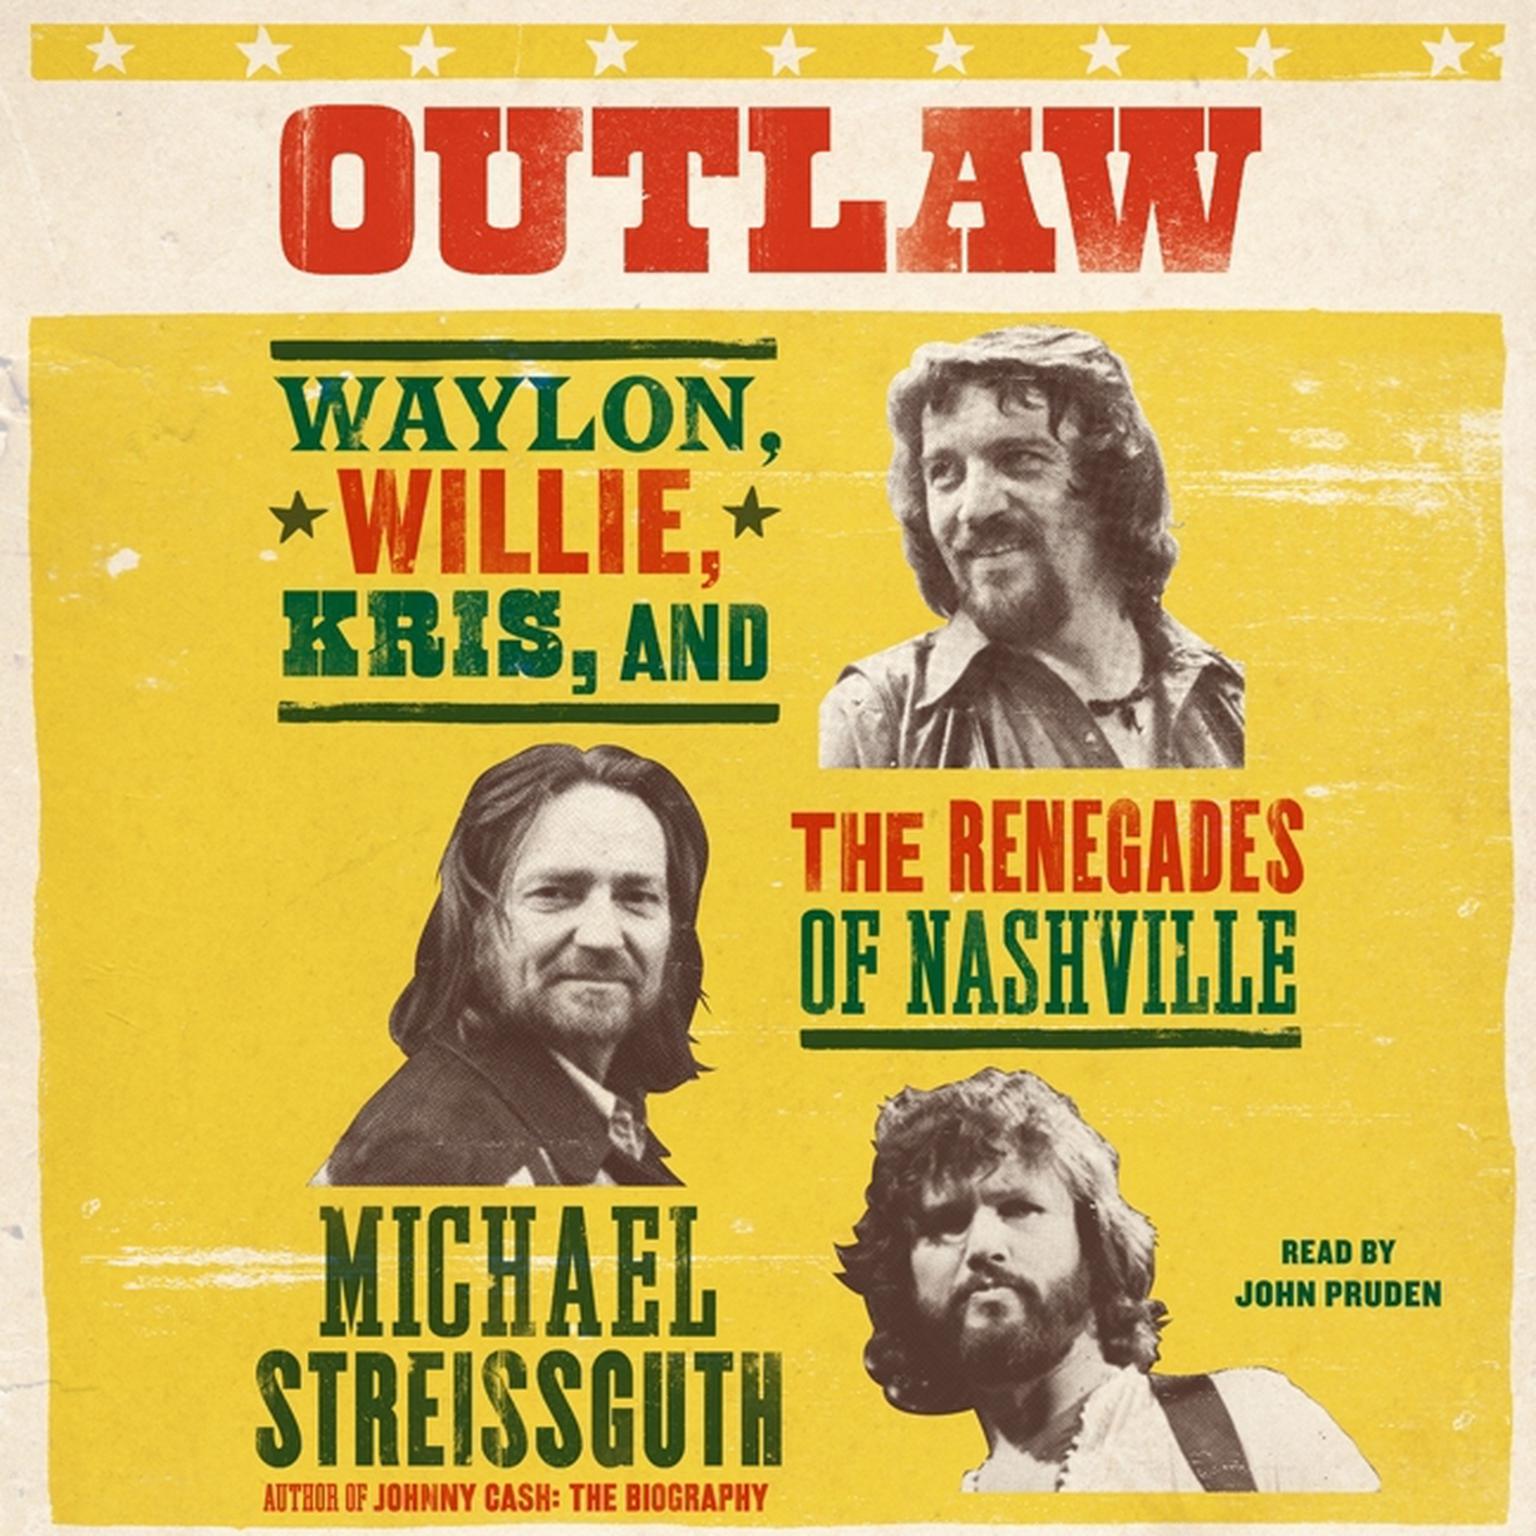 Outlaw: Waylon, Willie, Kris, and the Renegades of Nashville Audiobook, by Michael Streissguth